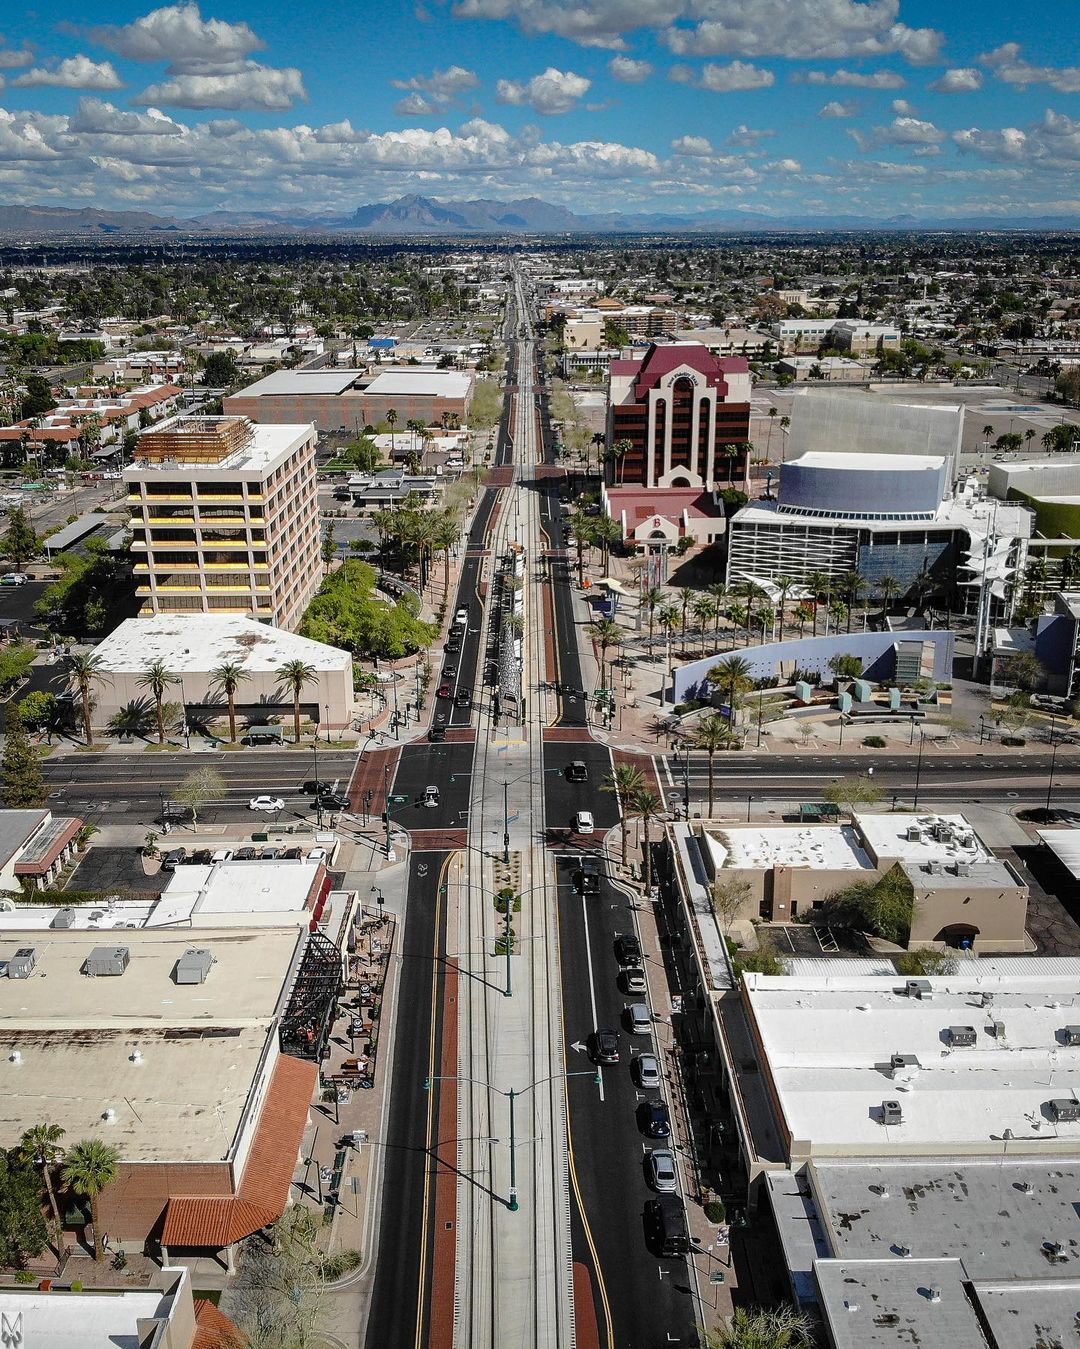 Drone Photo of Downtown Mesa. Photo by Instagram user @m44photography